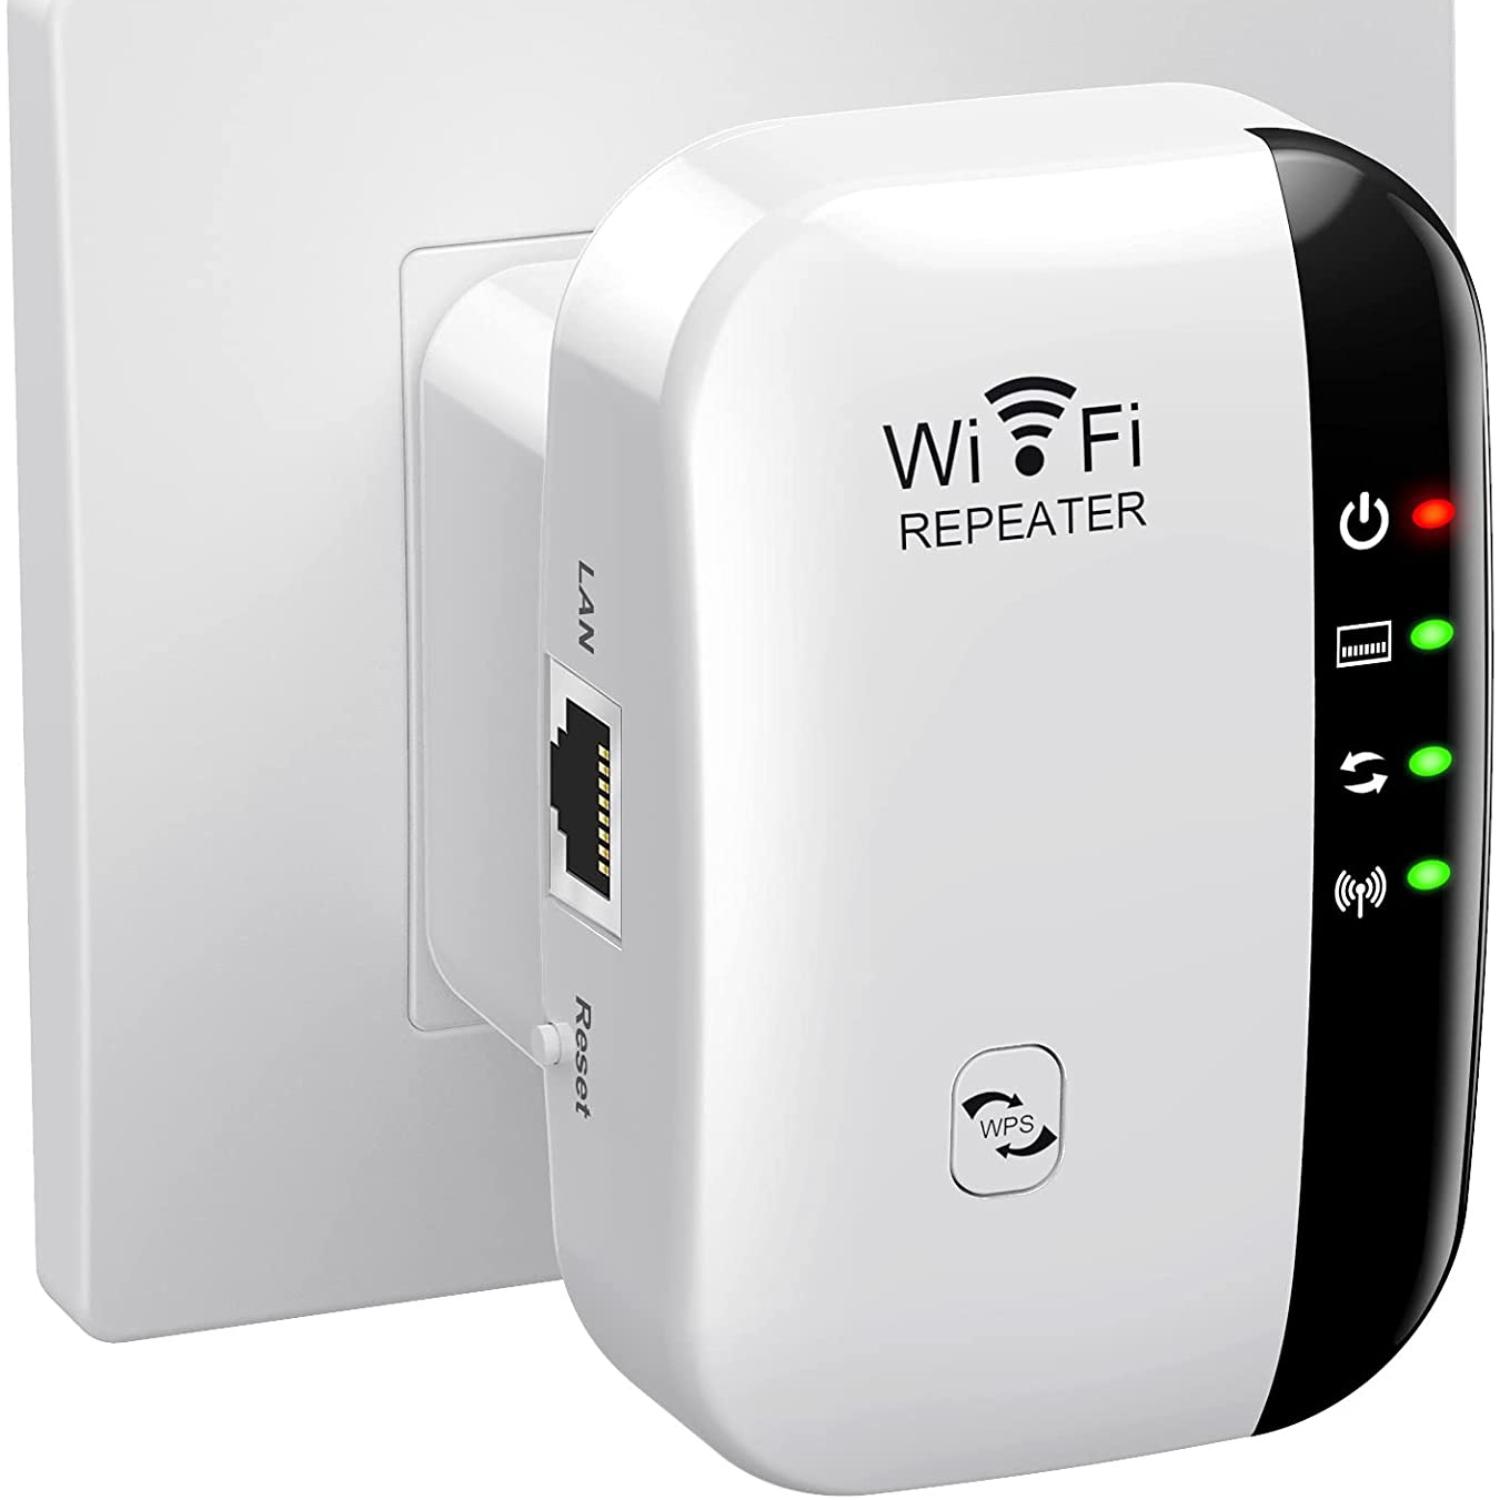 

Boost Your Wifi Signal Up To 300mbps - Long Range Wireless Repeater Access Point